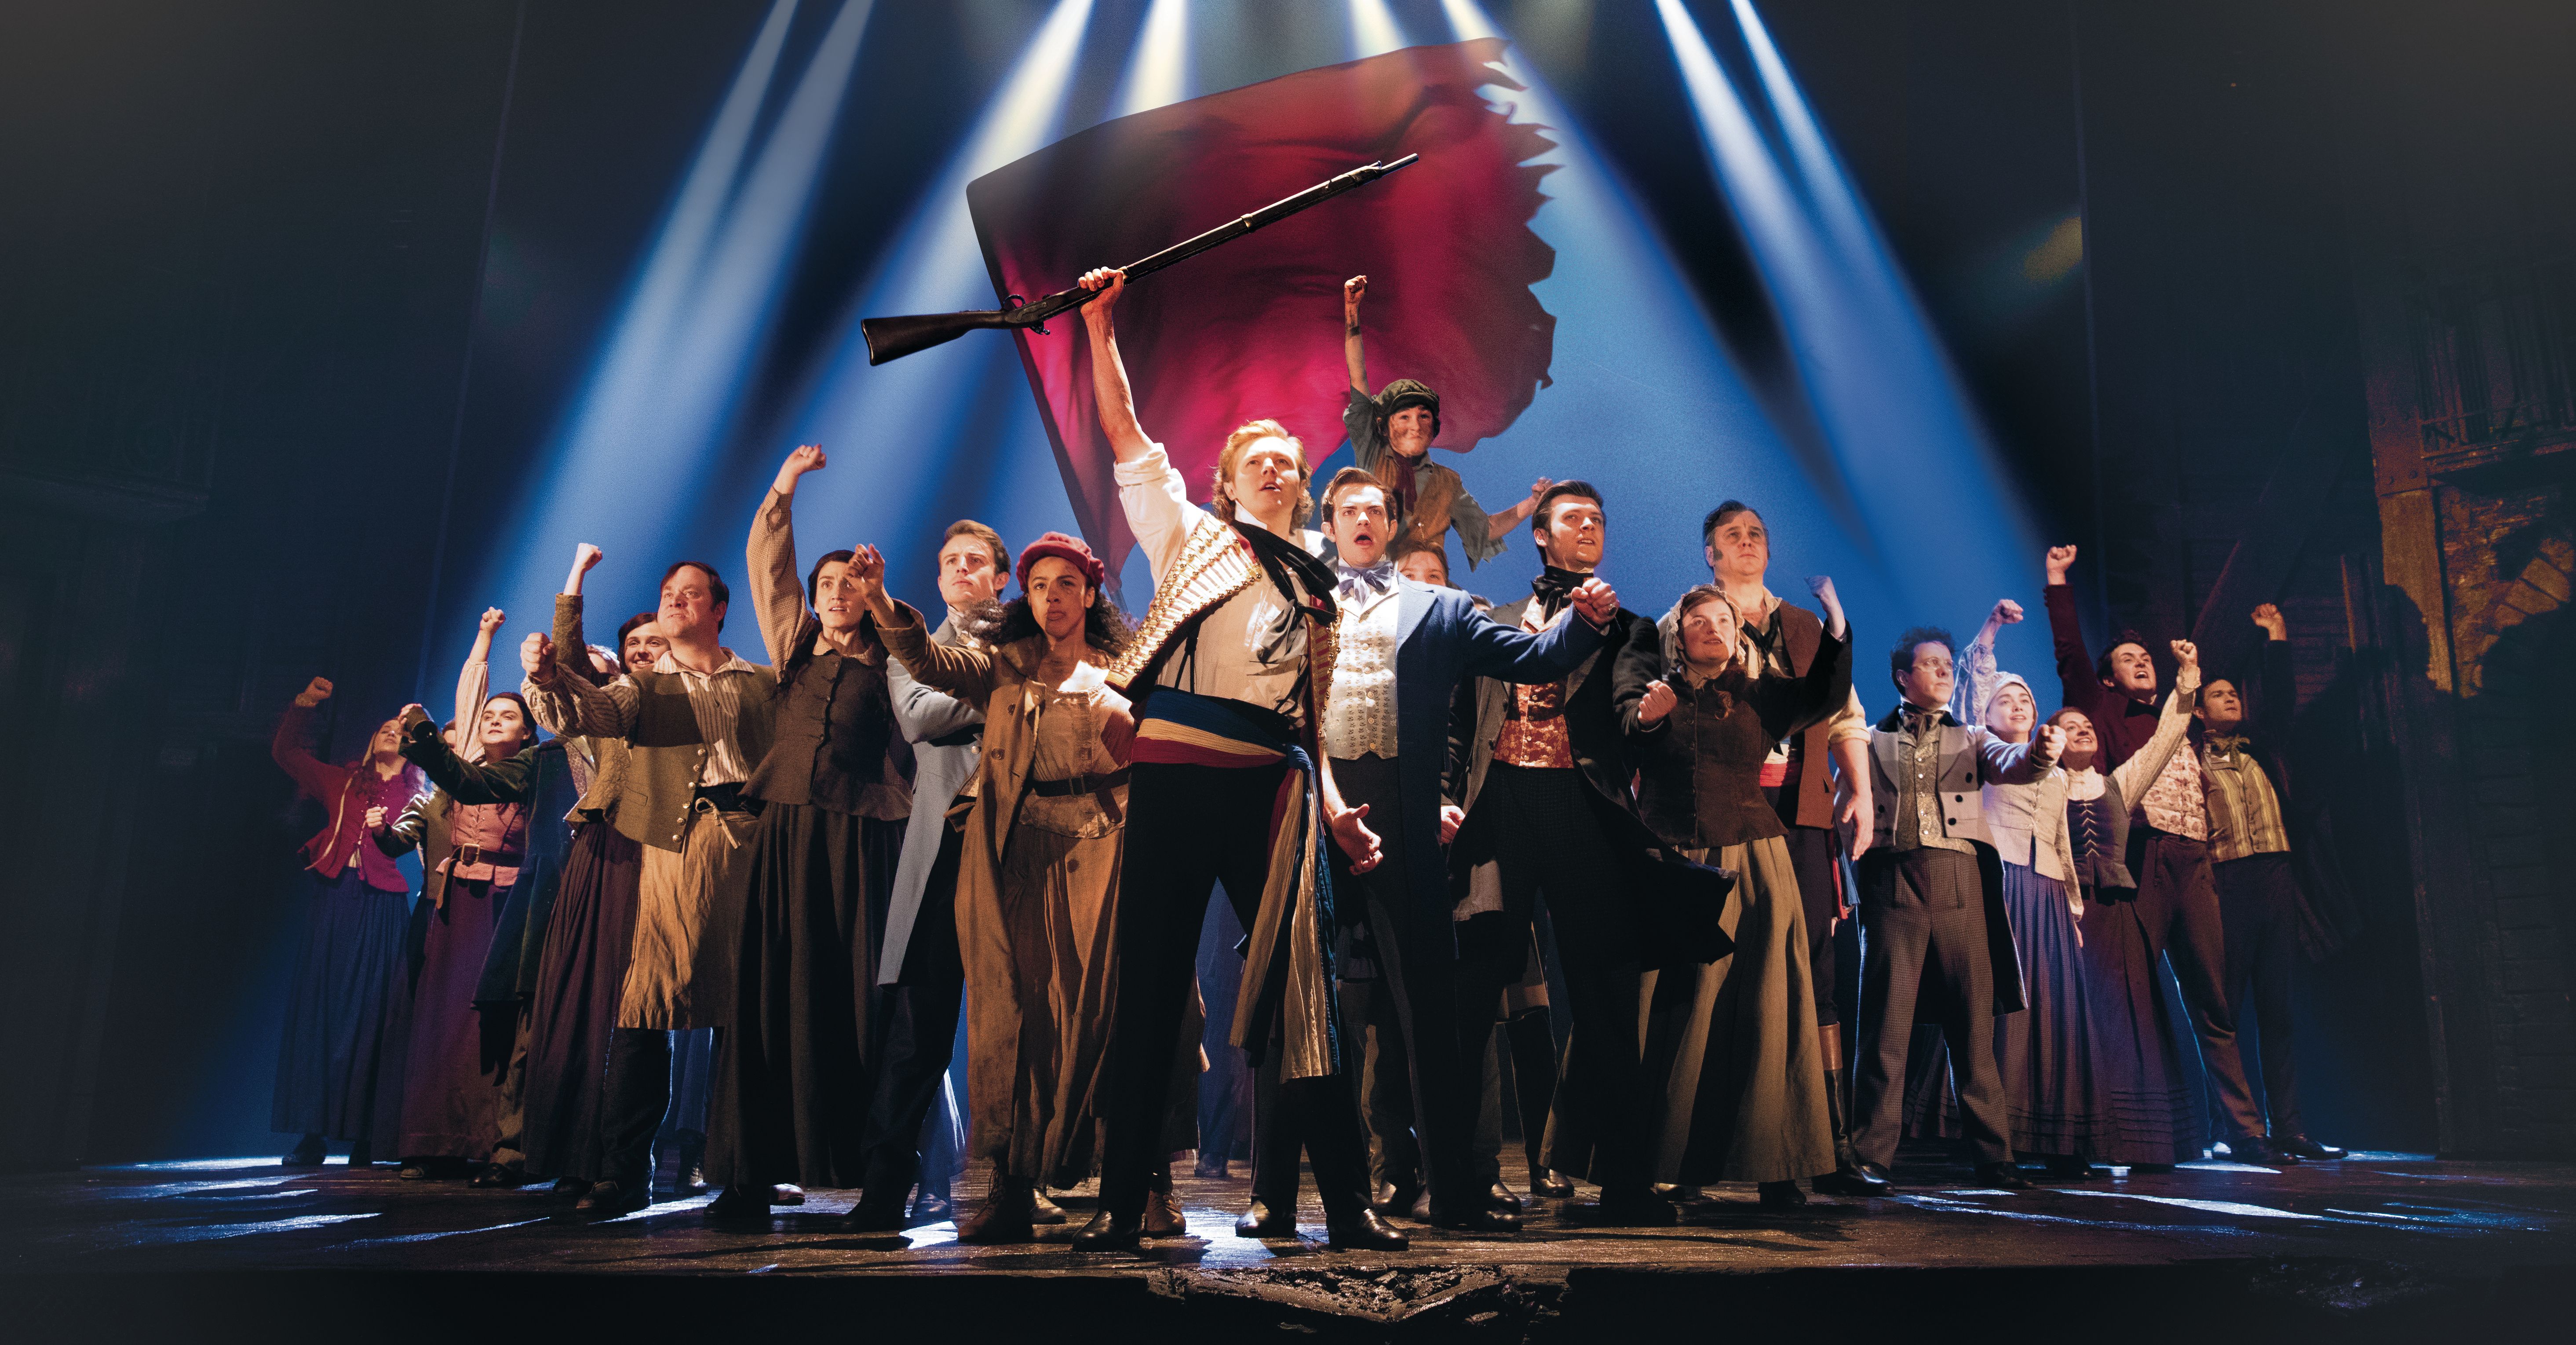 Full Casting Announced for Cameron Mackintosh's Record-Breaking Tour of Les Miserables